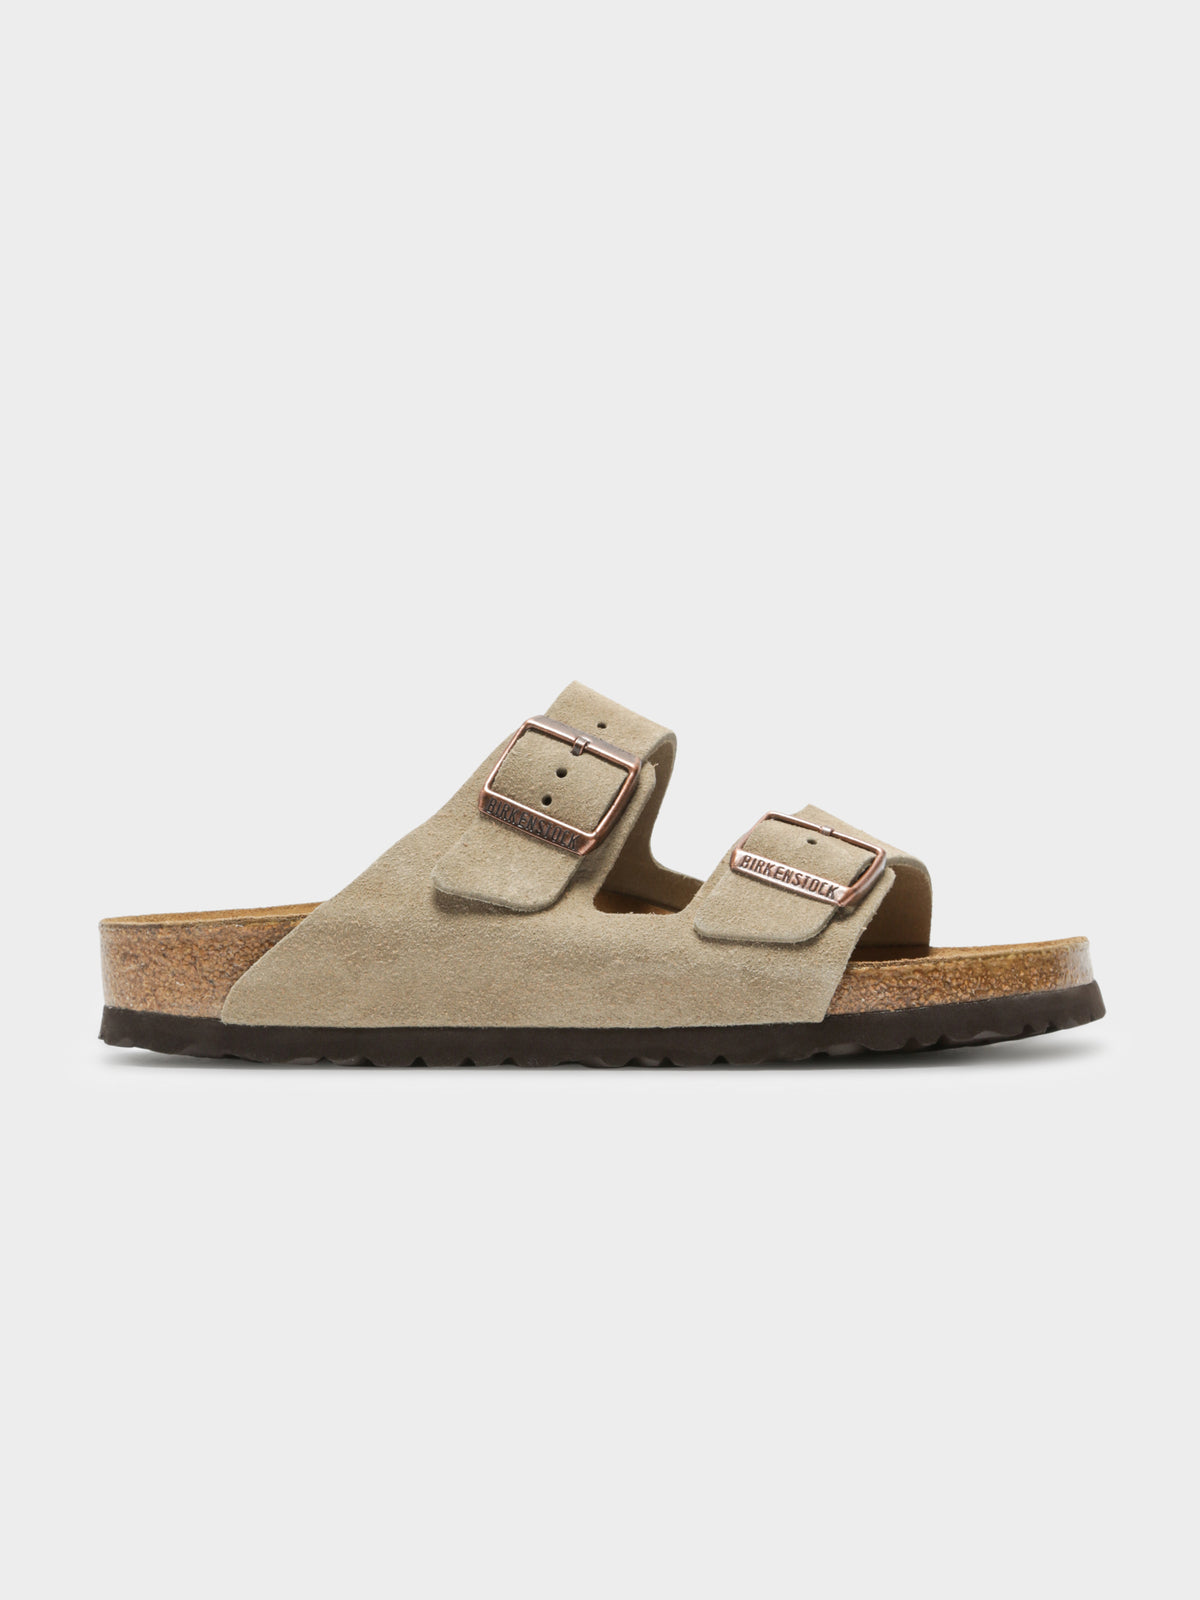 Unisex Arizona Two-Strap Sandals in Taupe Suede